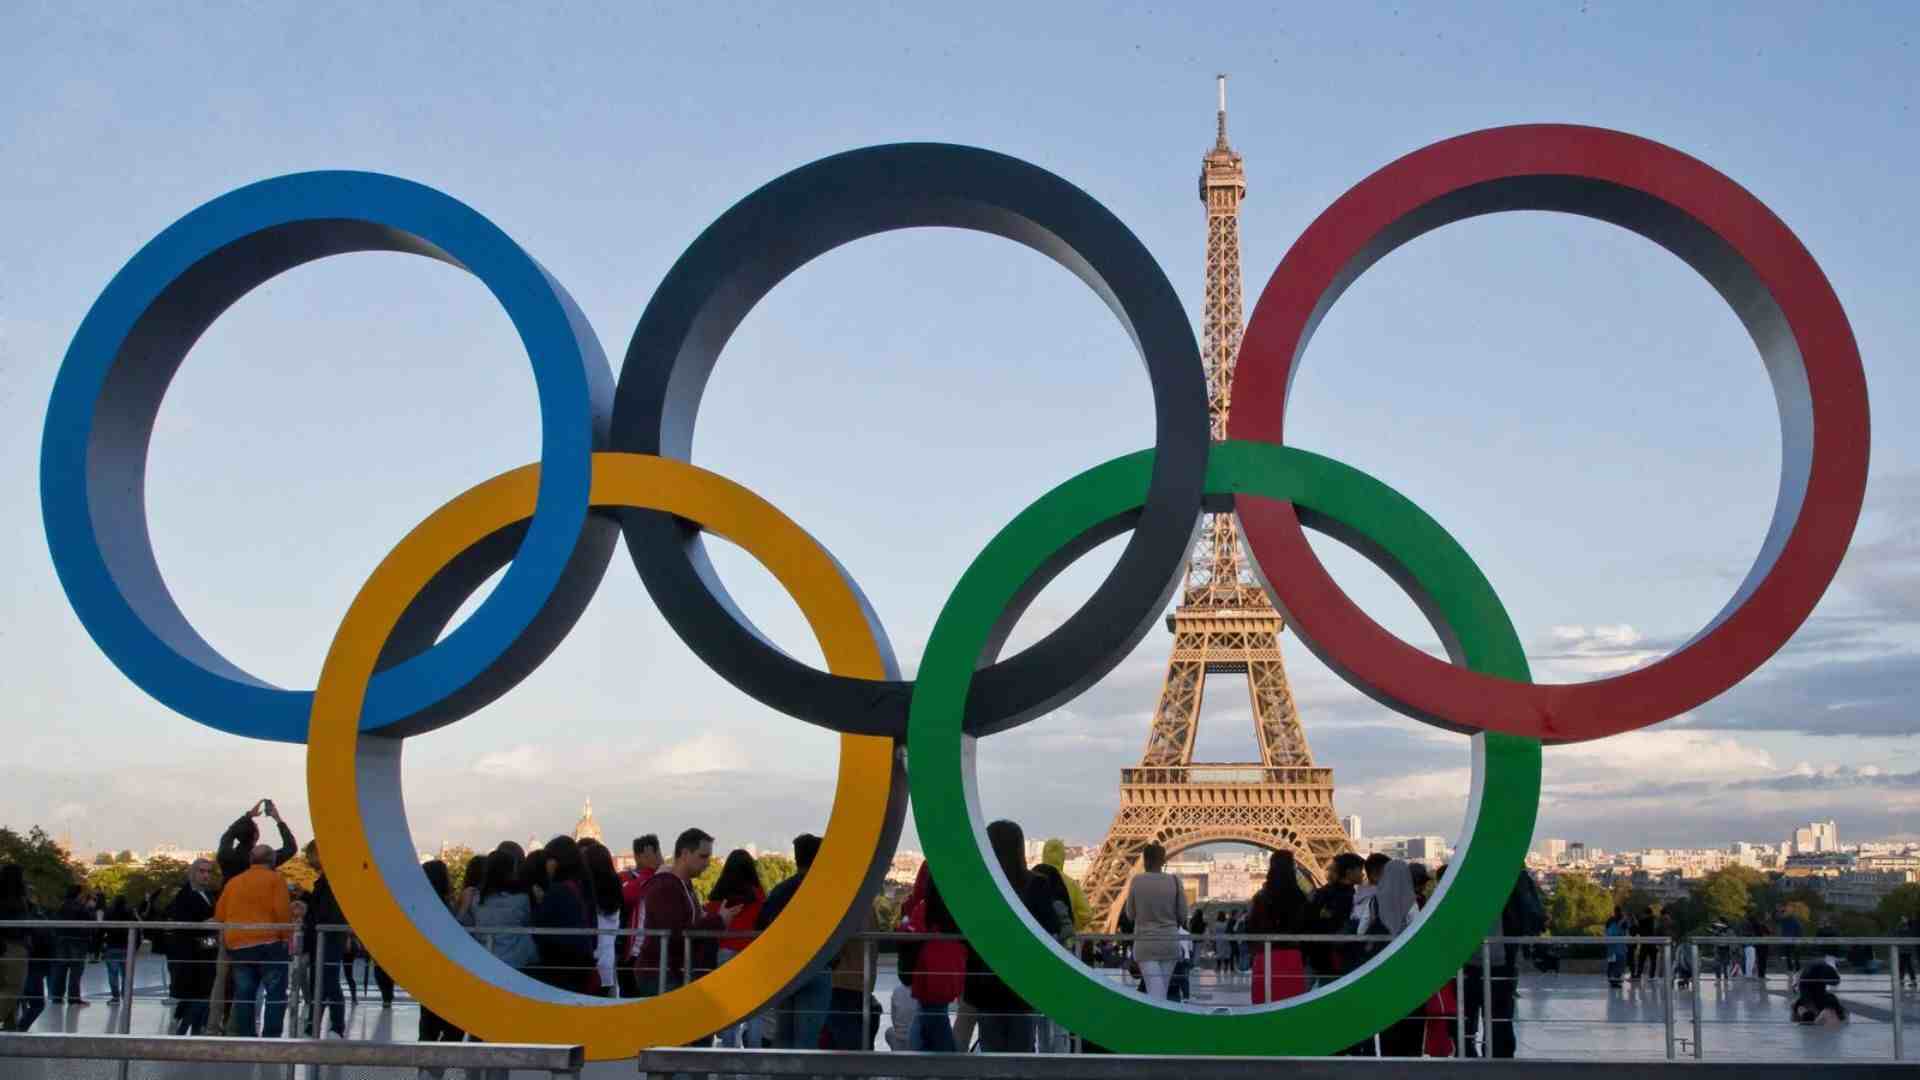 Global Tech Glitch Seen As A Positive Test for Paris Olympics 2024 By IOC